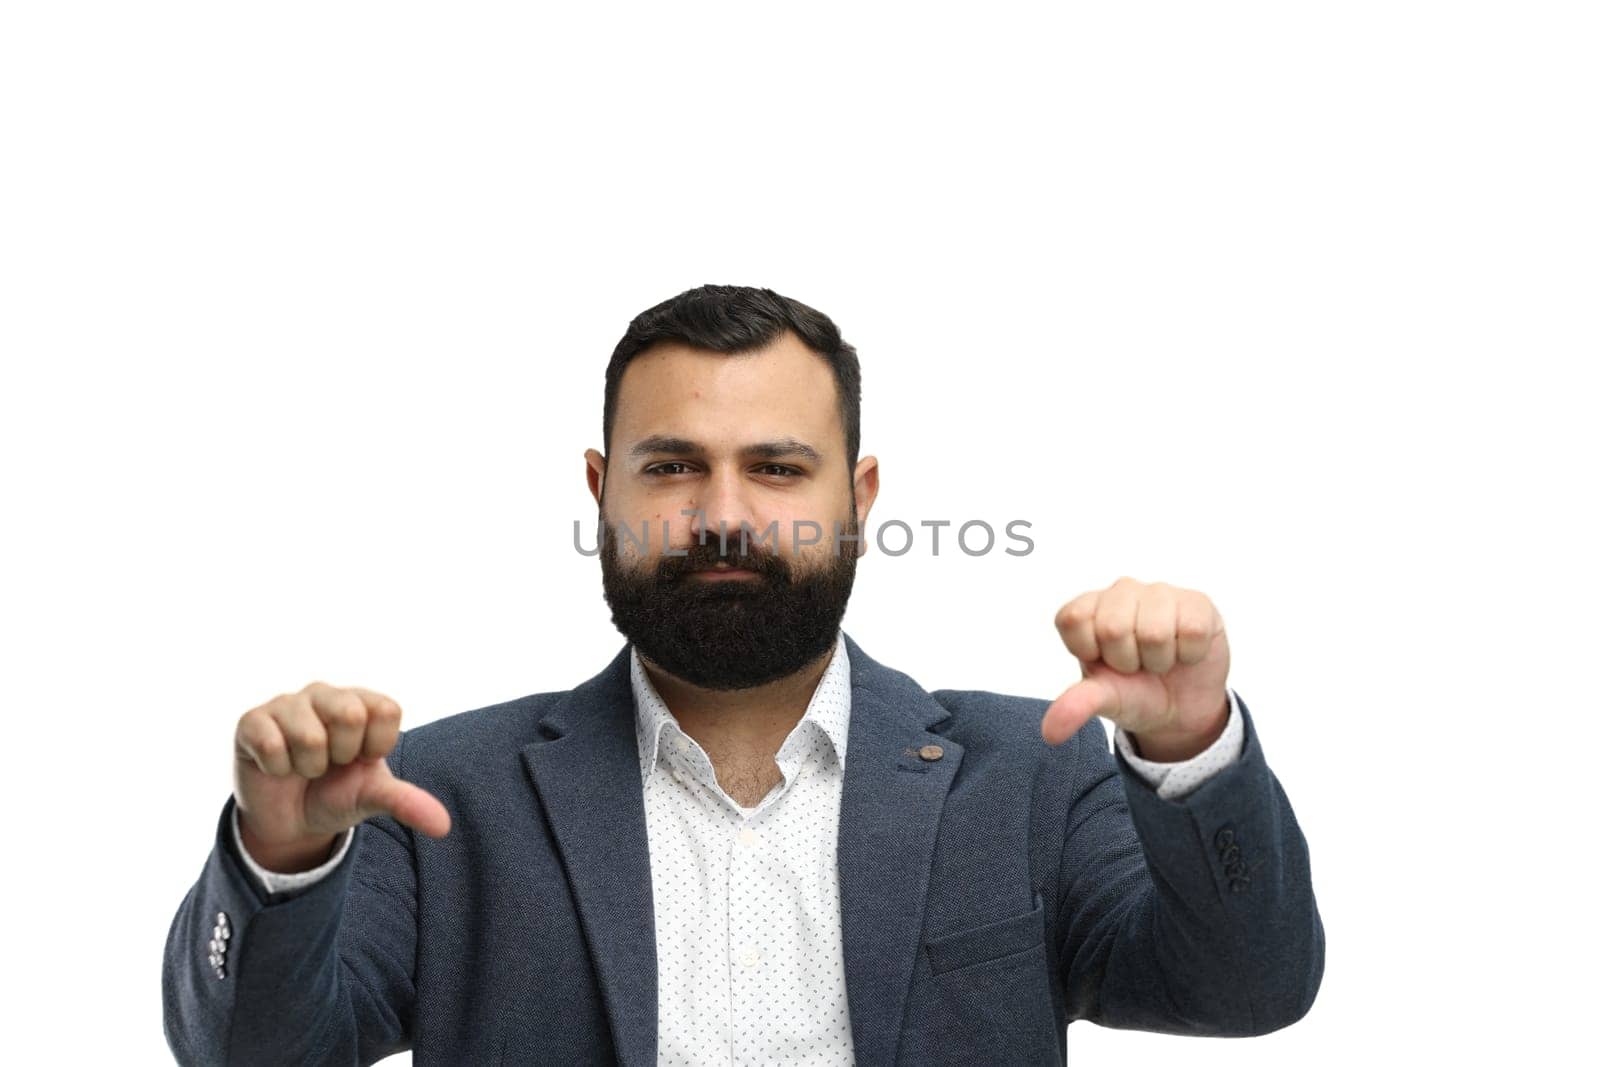 A man, close-up, on a white background, shows his thumbs down.